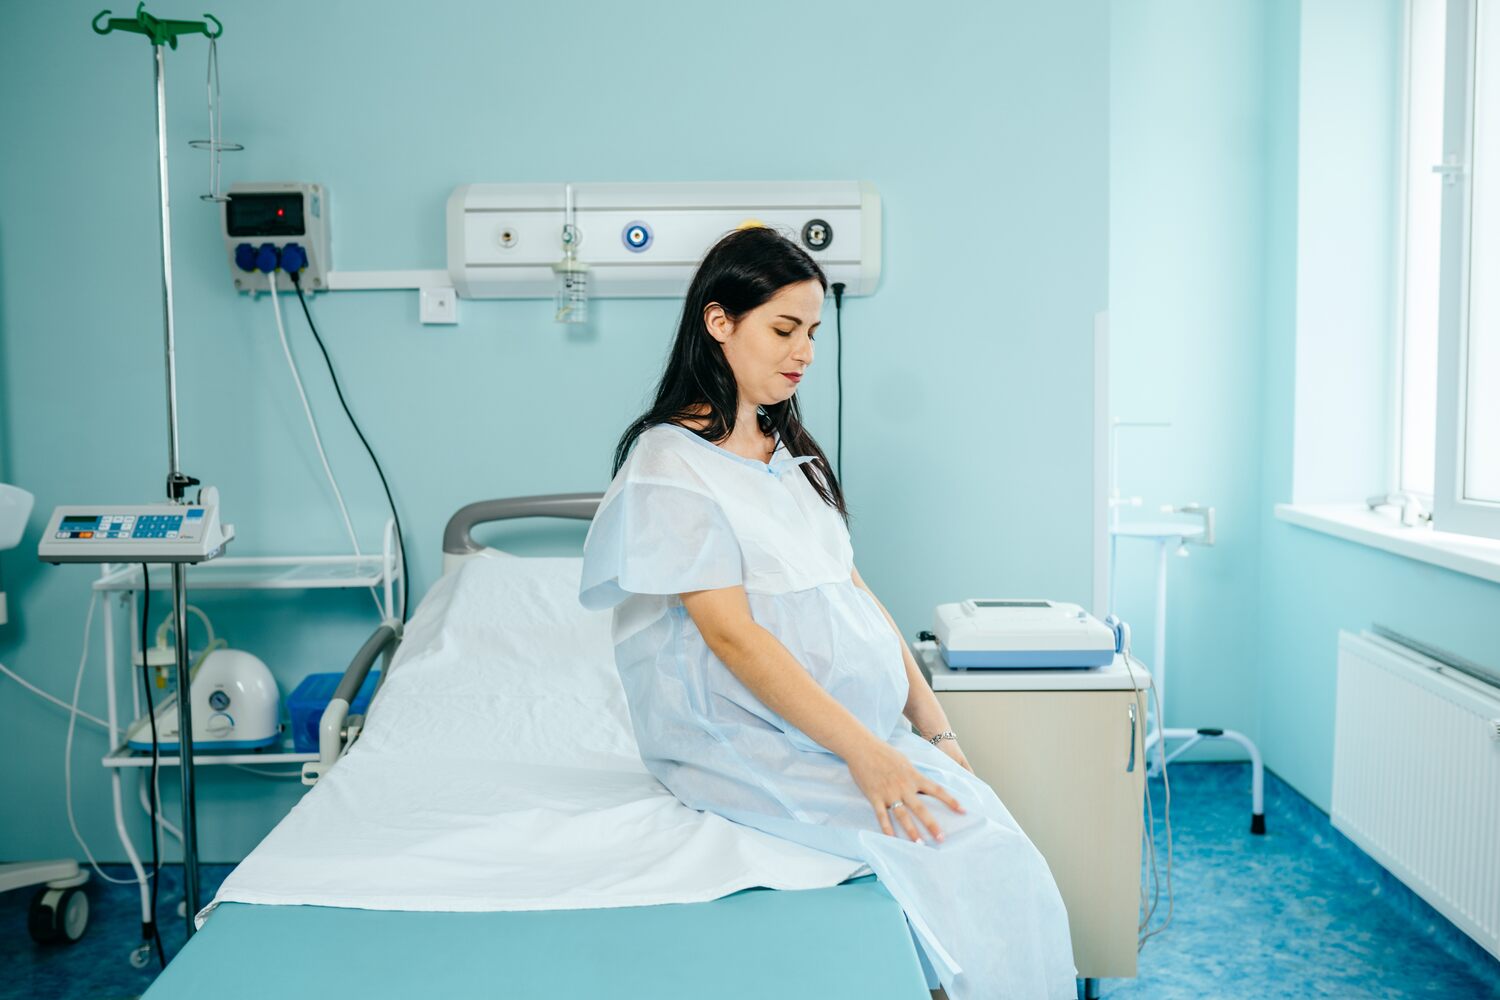 Things to Consider While Selecting the Maternity Hospital